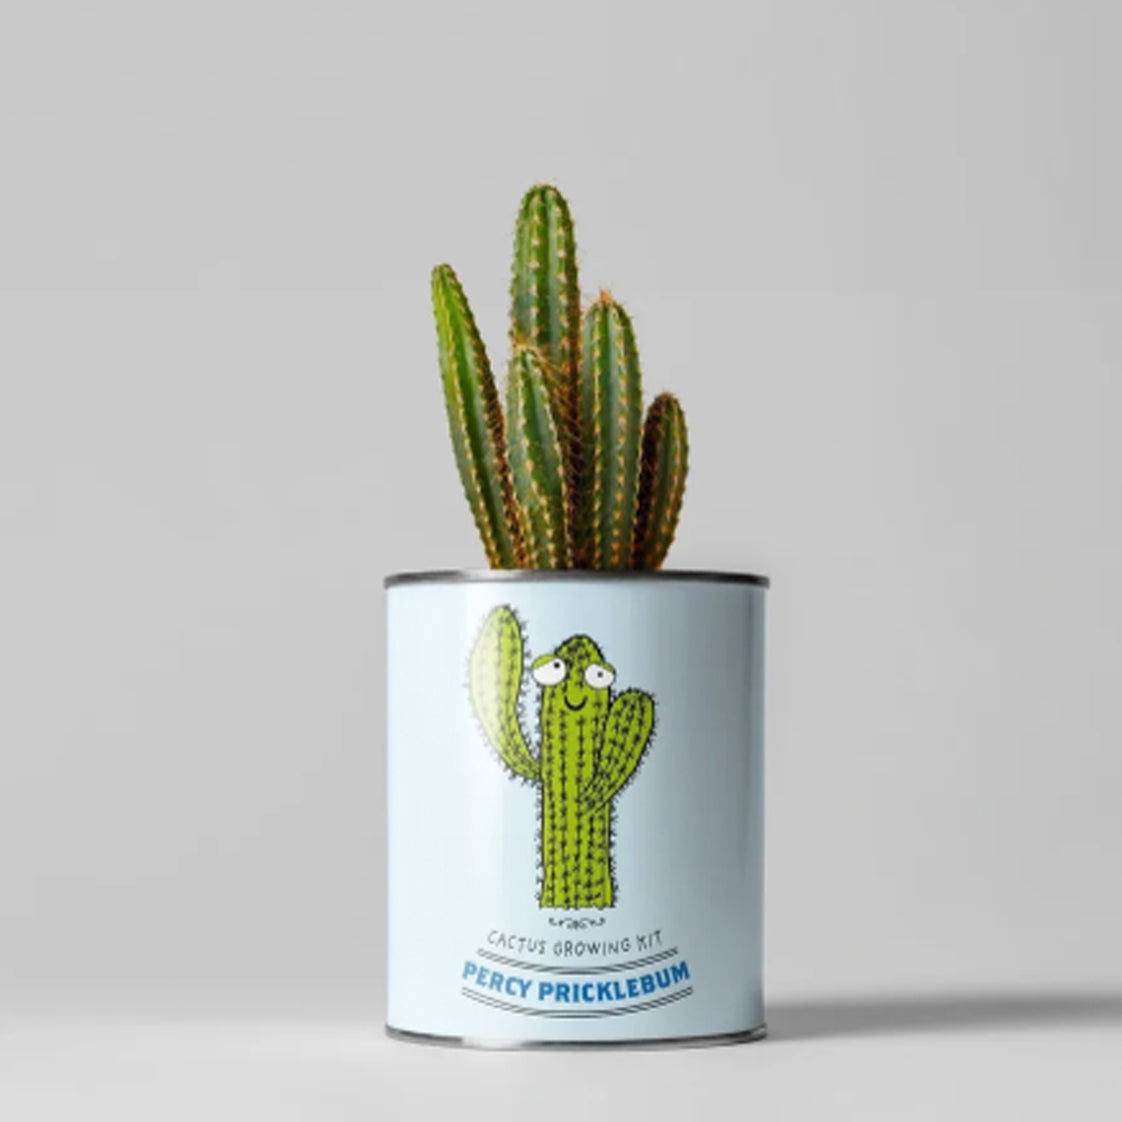 The Plant Gift Co. Percy Pricklebum - Grow Your Own Plant Kit